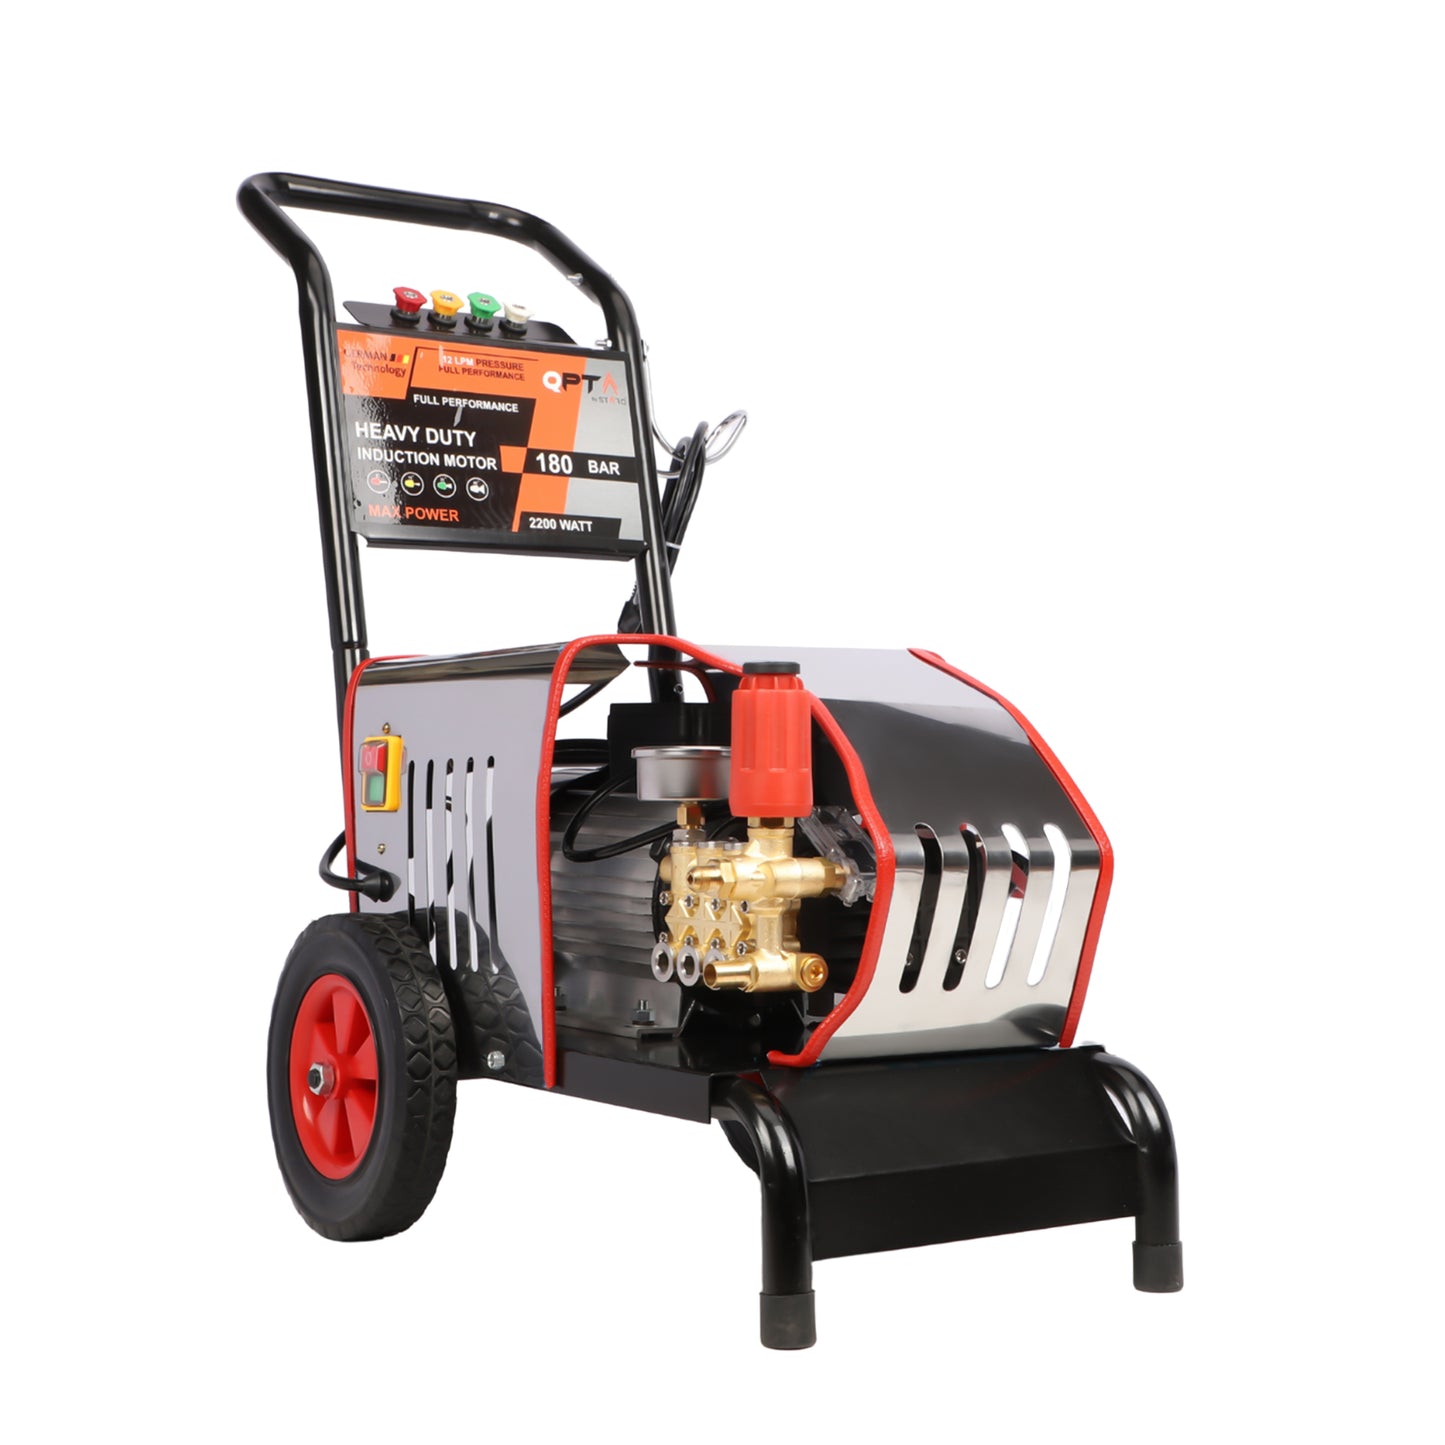 QPT By STARQ HIGH PRESSURE WASHER QT1800HPW HEAVY DUTY FOR  COMMERCIAL USE